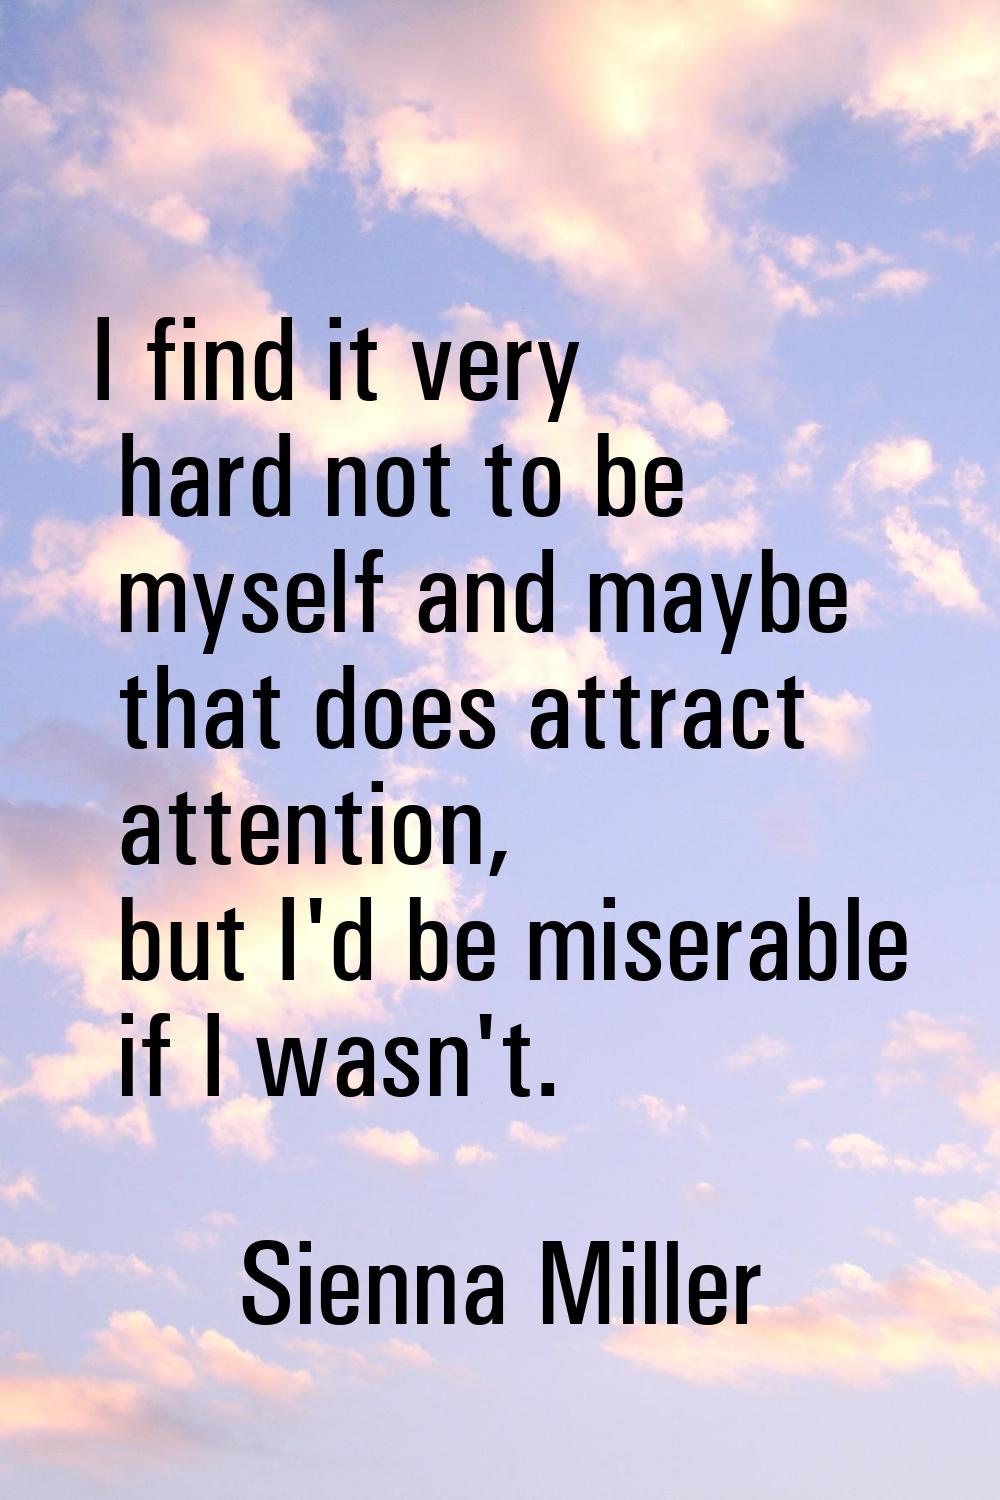 I find it very hard not to be myself and maybe that does attract attention, but I'd be miserable if